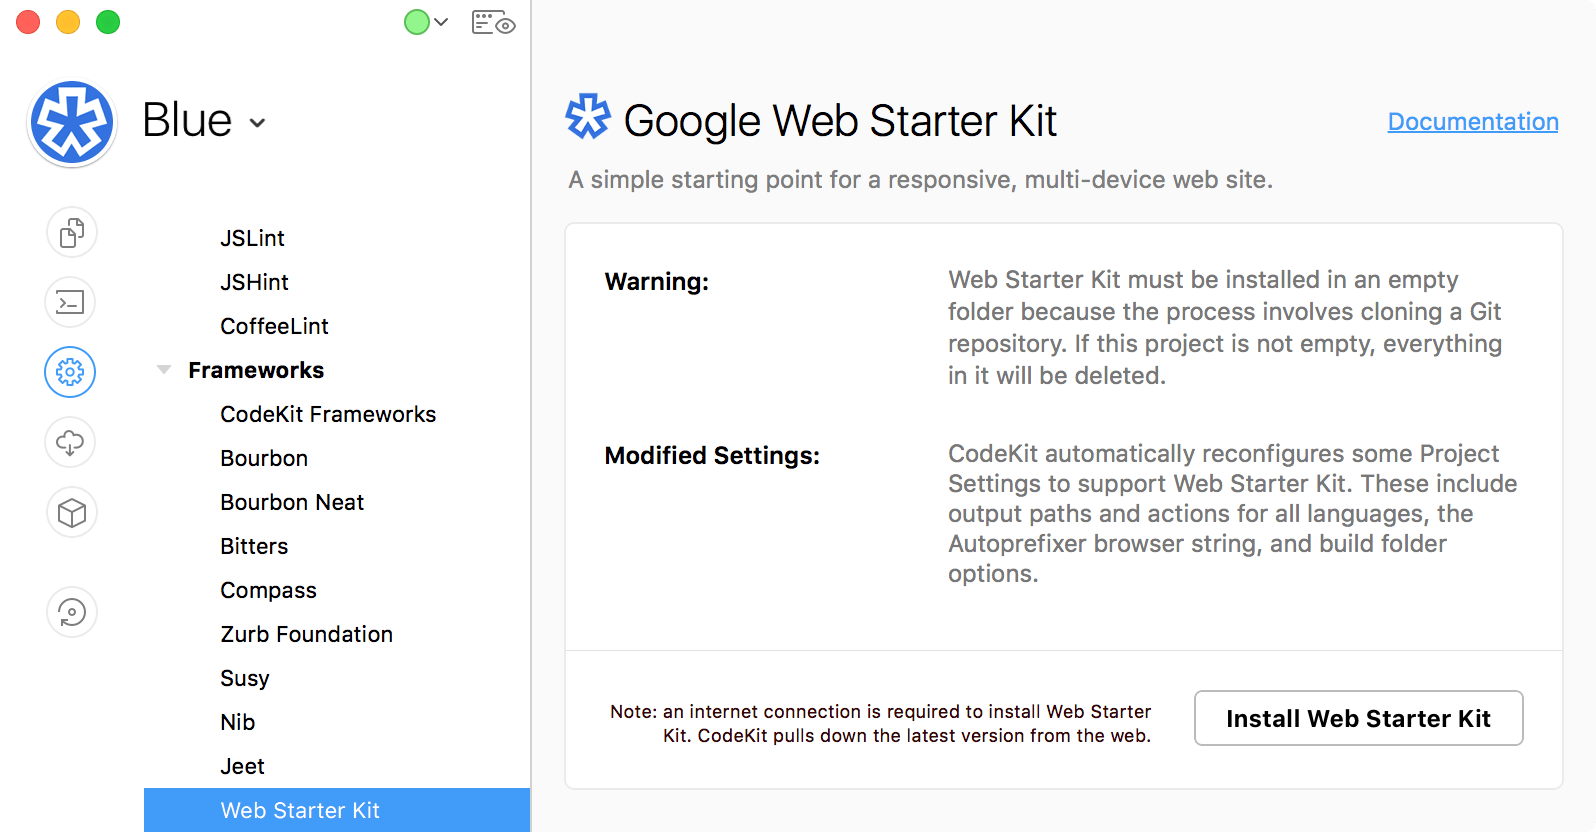 a screenshot of the Google Web Starter Kit category of Project Settings in CodeKit